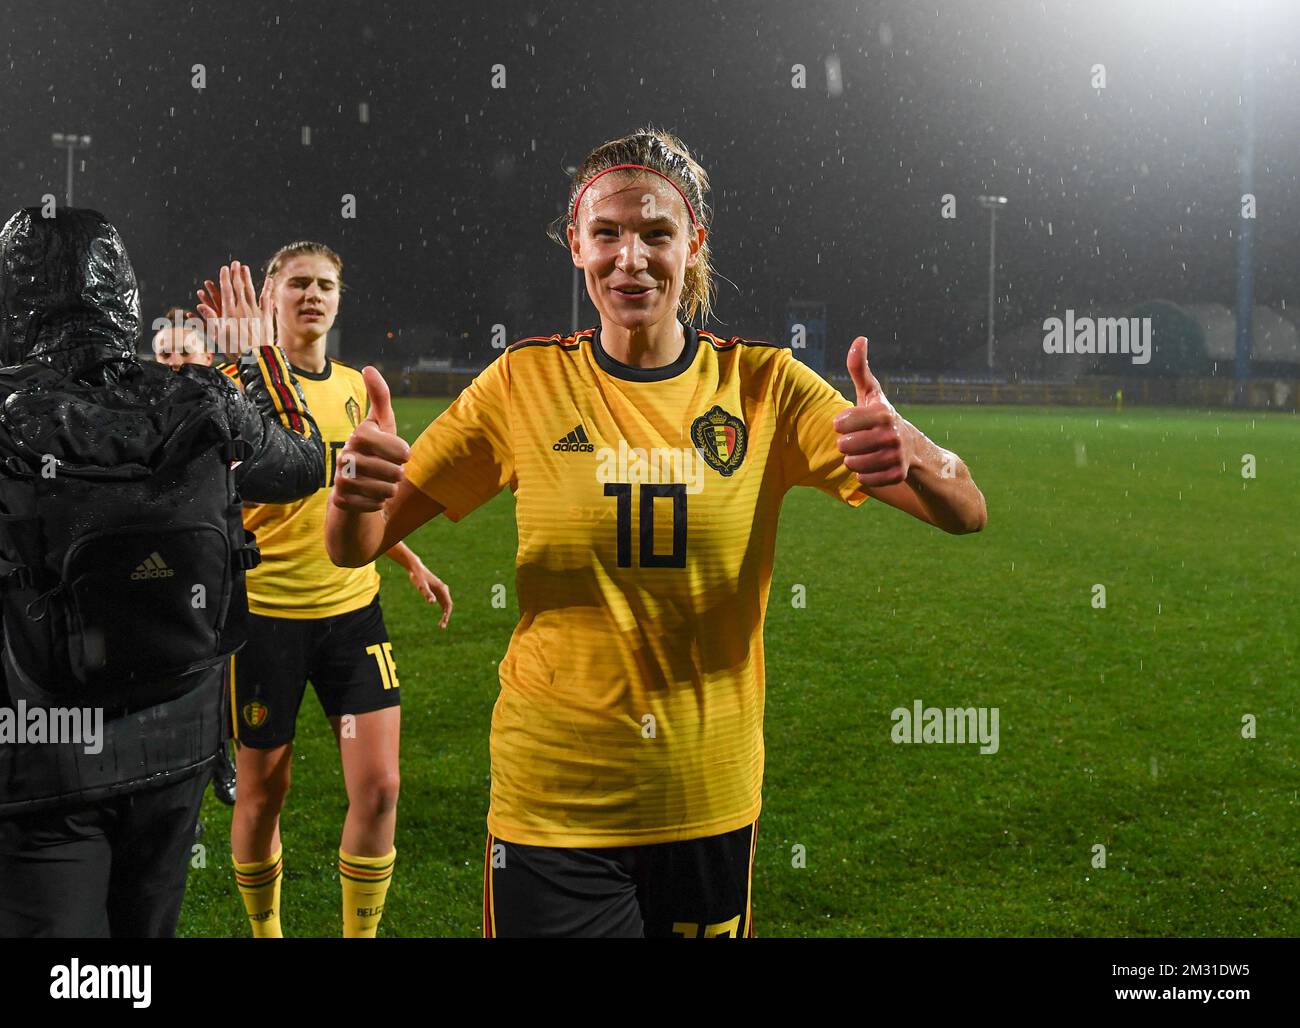 Belgium's Justine Vanhaevermaet celebrates after winning a soccer game between Croatia and Belgium's Red Flames, Friday 08 November 2019 in Zapresic, Croatia, the third out of 8 qualification games for the women's Euro 2021 European Championships. BELGA PHOTO DAVID CATRY Stock Photo